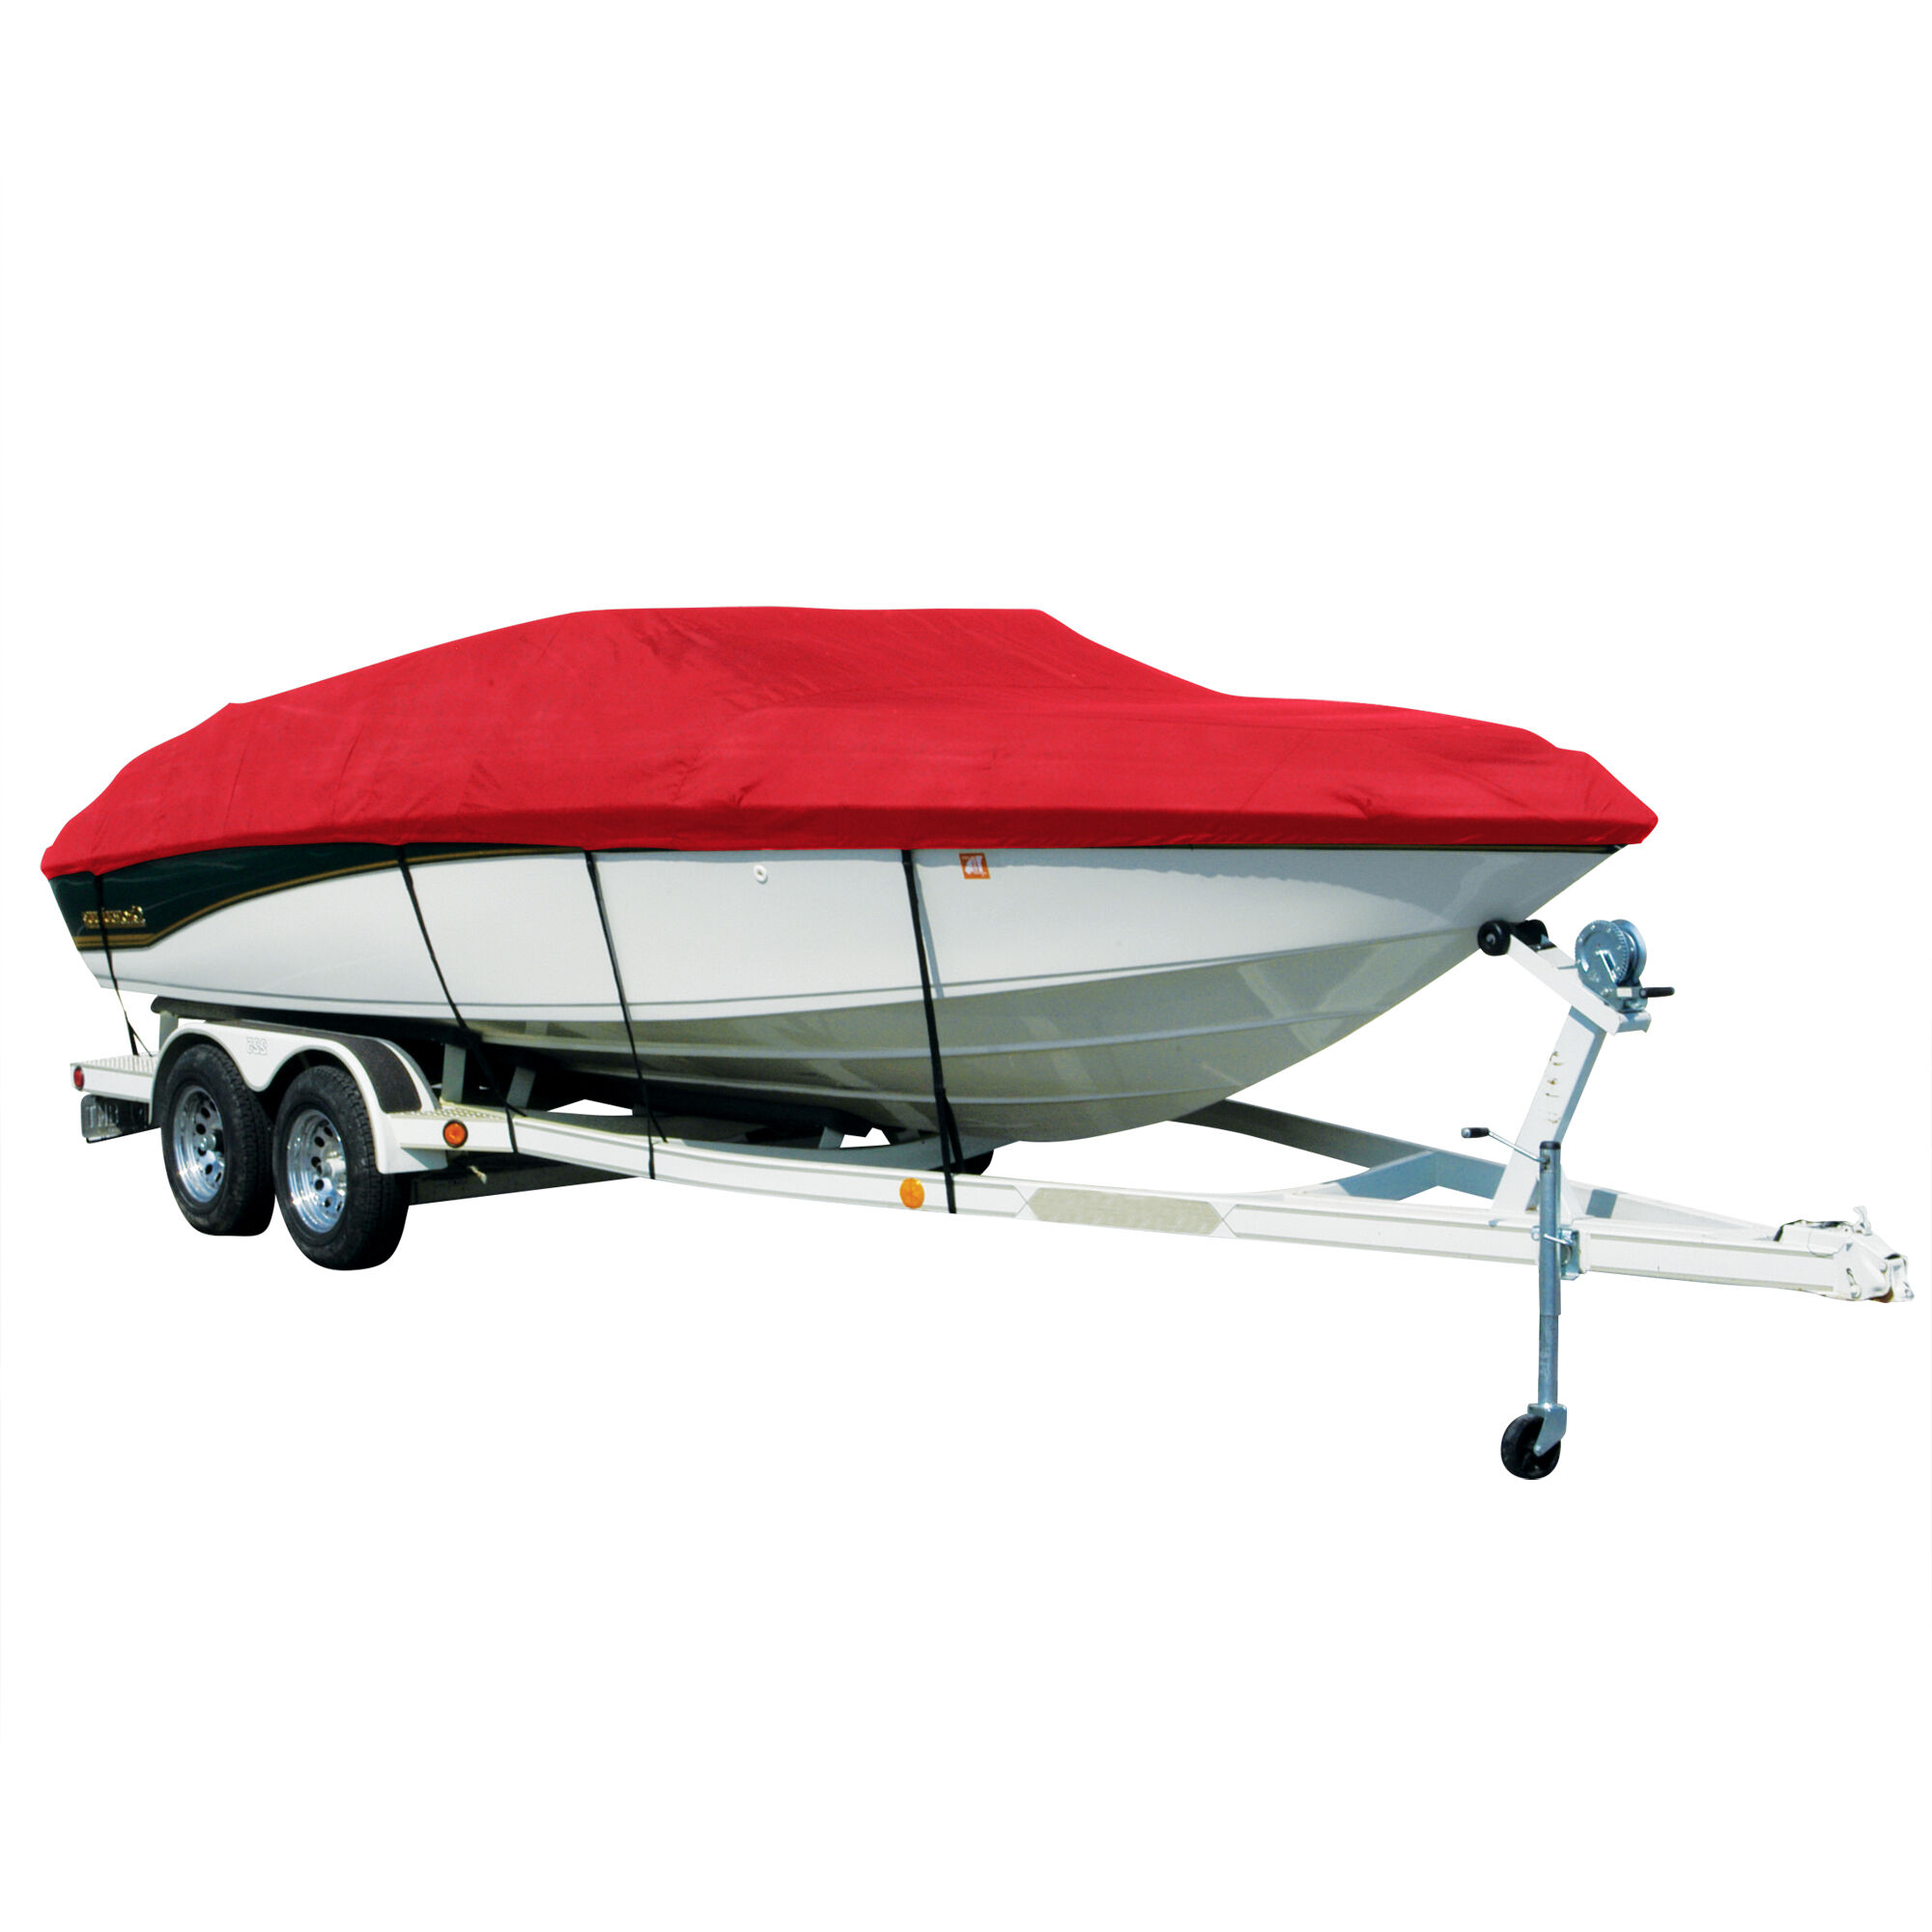 Covermate Exact Fit Sharkskin Boat Cover For Supreme 19 Cs Does Not Cover PLATFORMm in Red